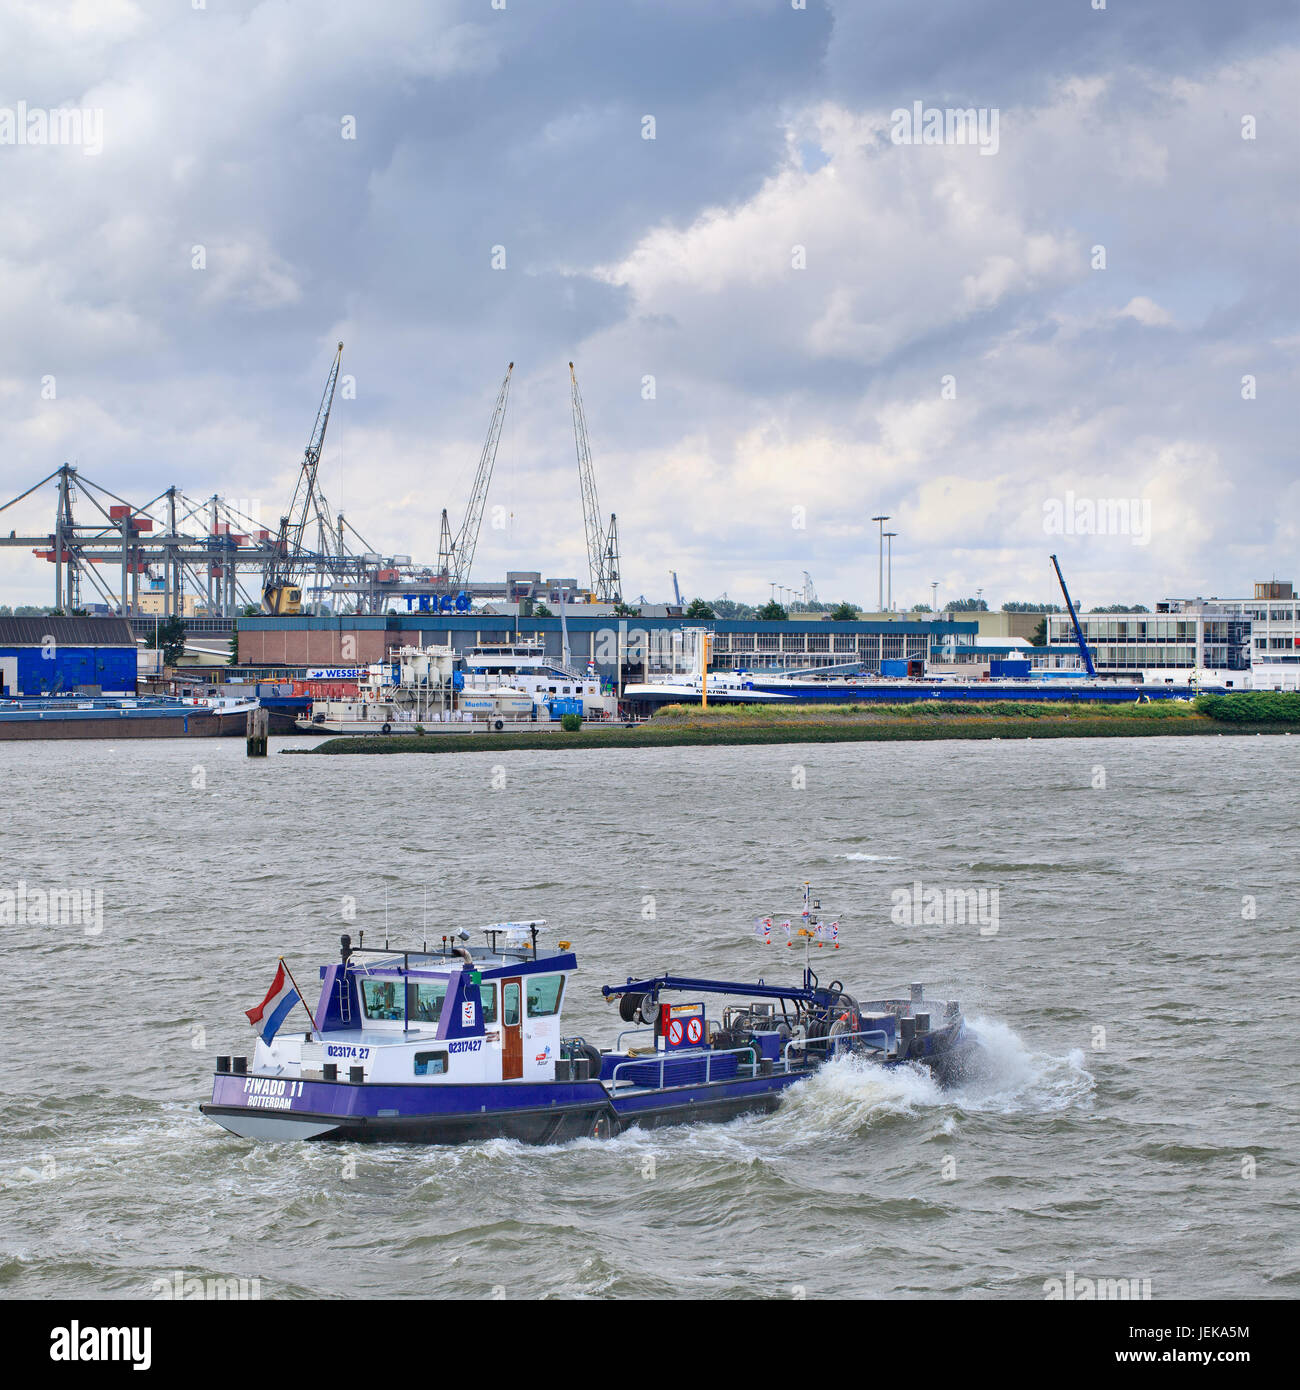 ROTTERDAM-AUGUST 7, 2012. Tank vessel Fiwado 11 in the Port of Rotterdam, the largest sea port in Europe. Stock Photo